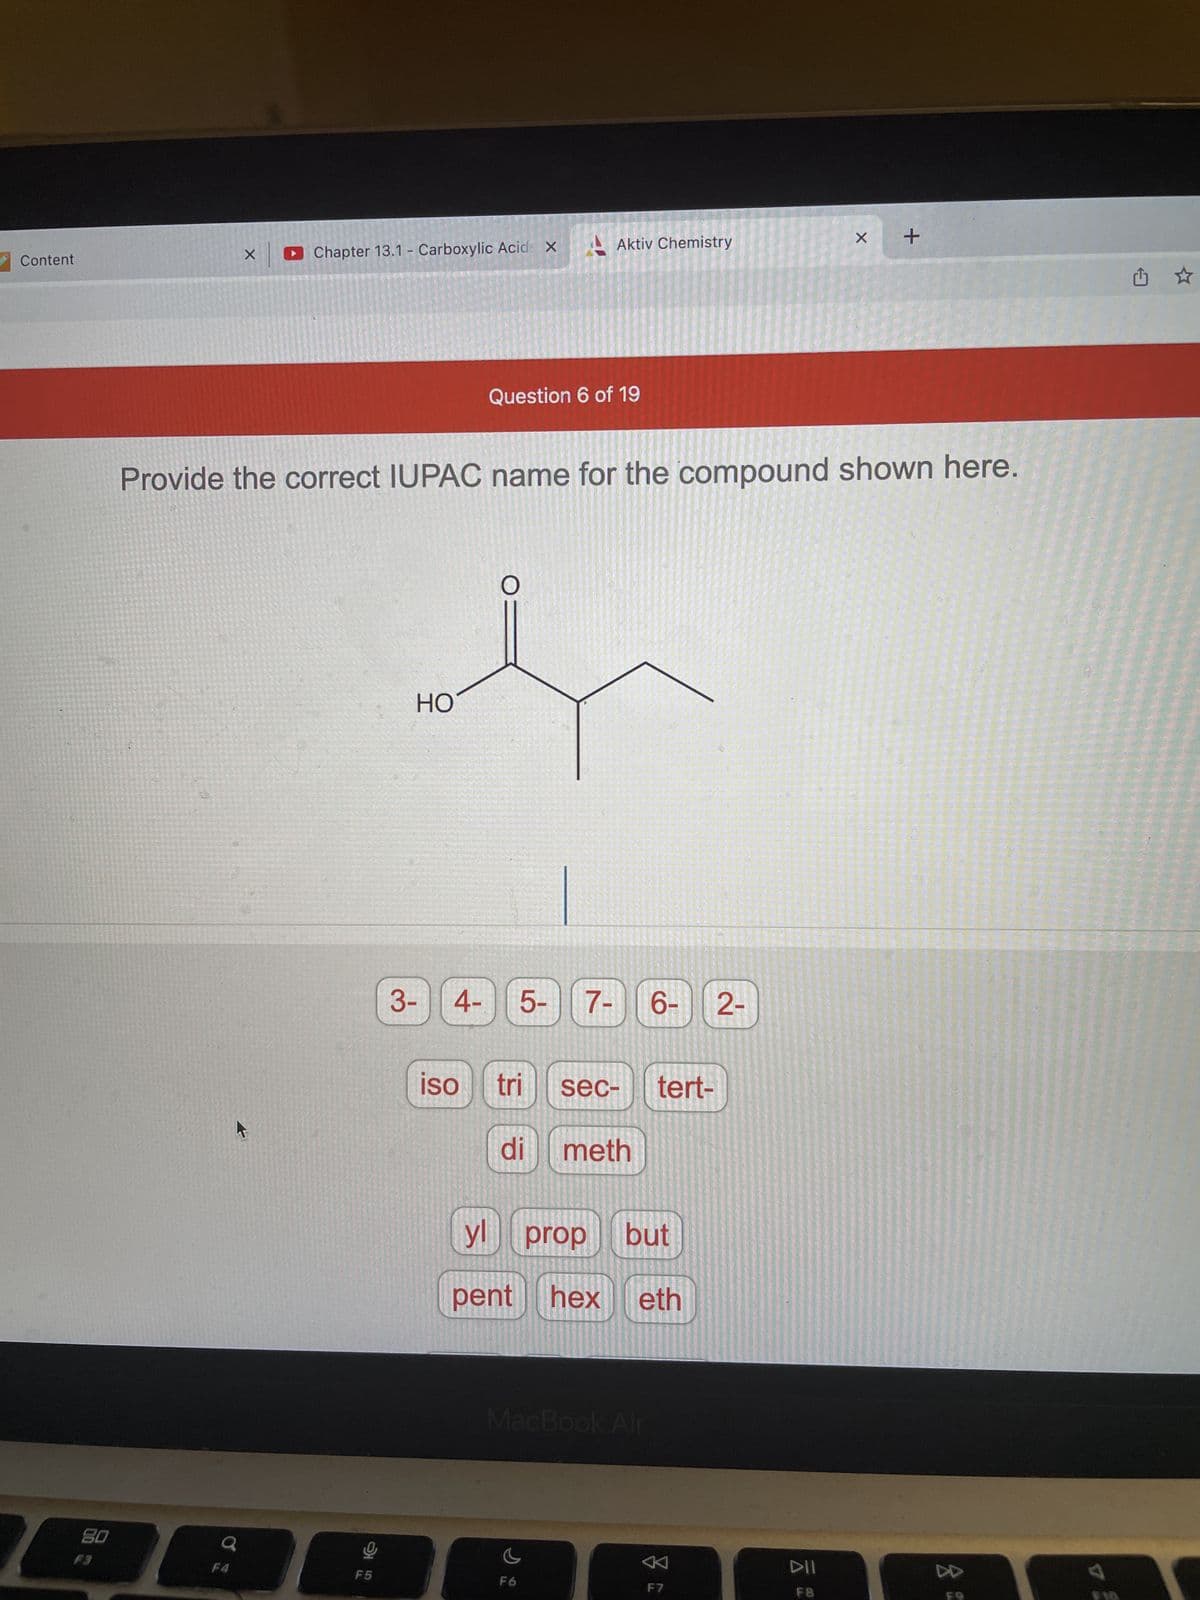 Content
80
Aktiv Chemistry
Chapter 13.1 - Carboxylic Acid X
X
Question 6 of 19
Provide the correct IUPAC name for the compound shown here.
HO
3- 4-
2-
iso
TO
F5
5-
6⁰9
7-
sec- tert-
tri
di meth
yl prop but
pent hex eth
MacBook Air
F6
F7
DII
F8
X
+
DD
Û ☆